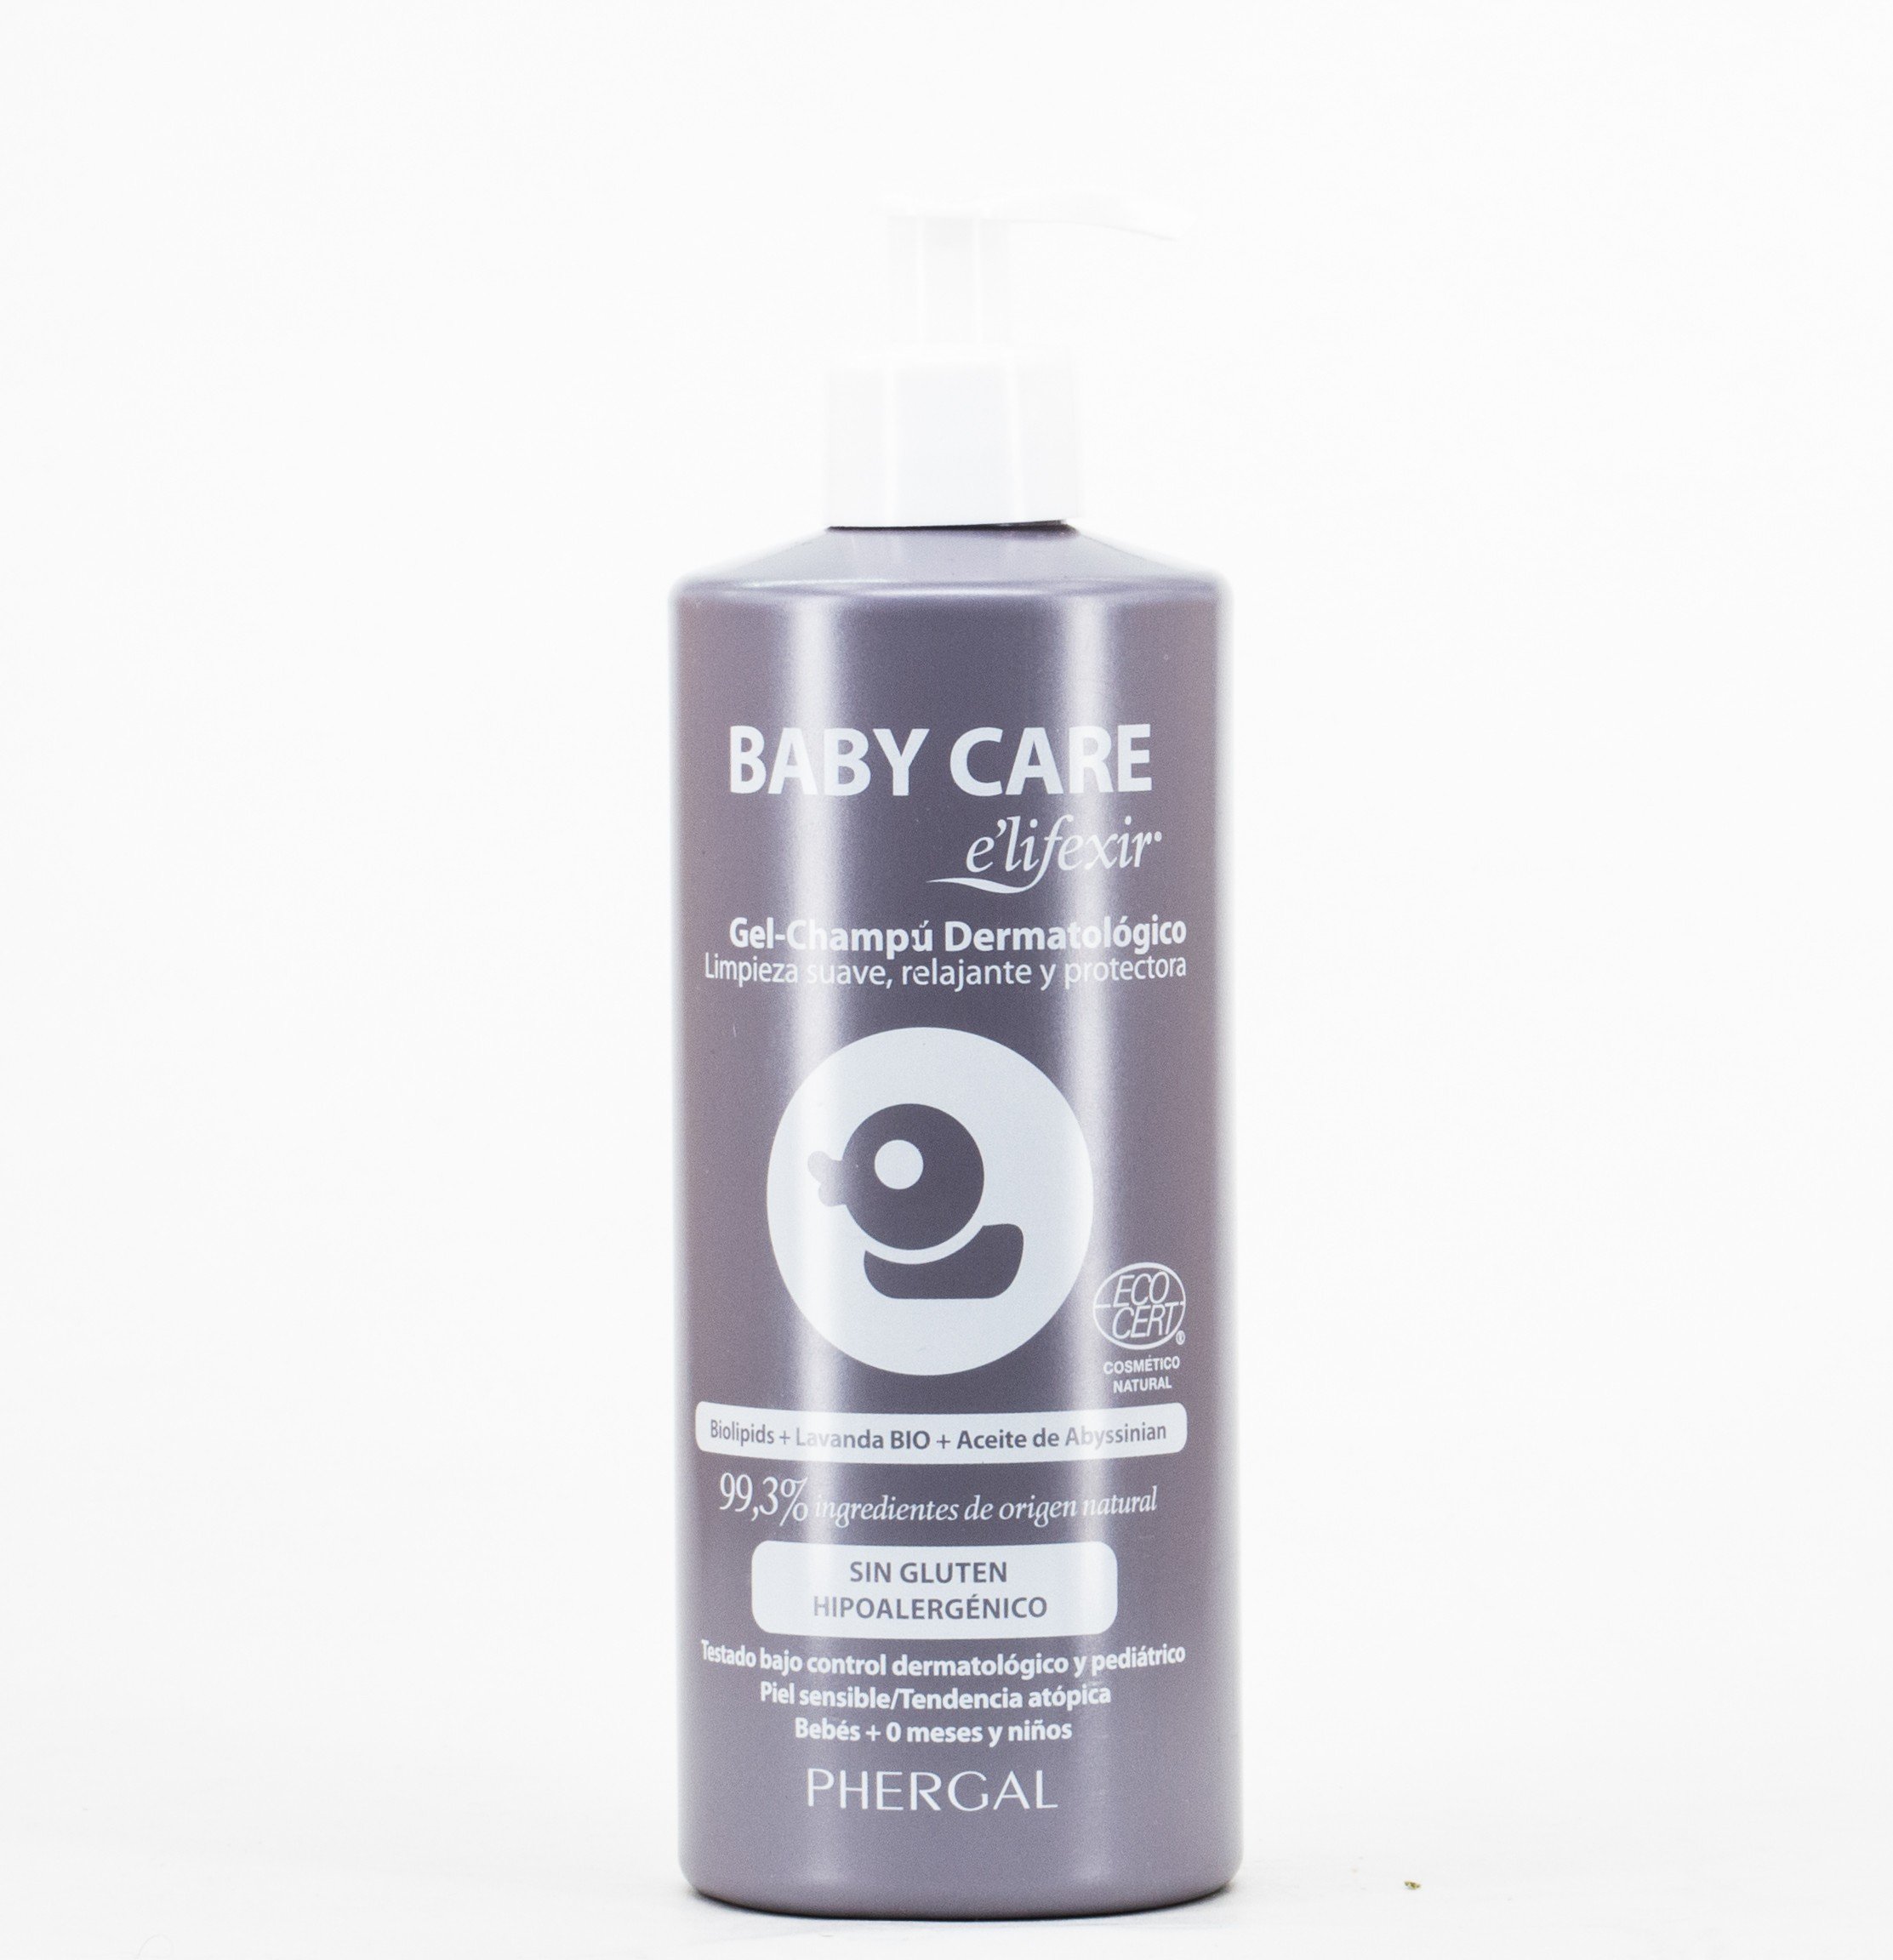 Elifexir Baby Care ECO Gel-Champu, 500ml.